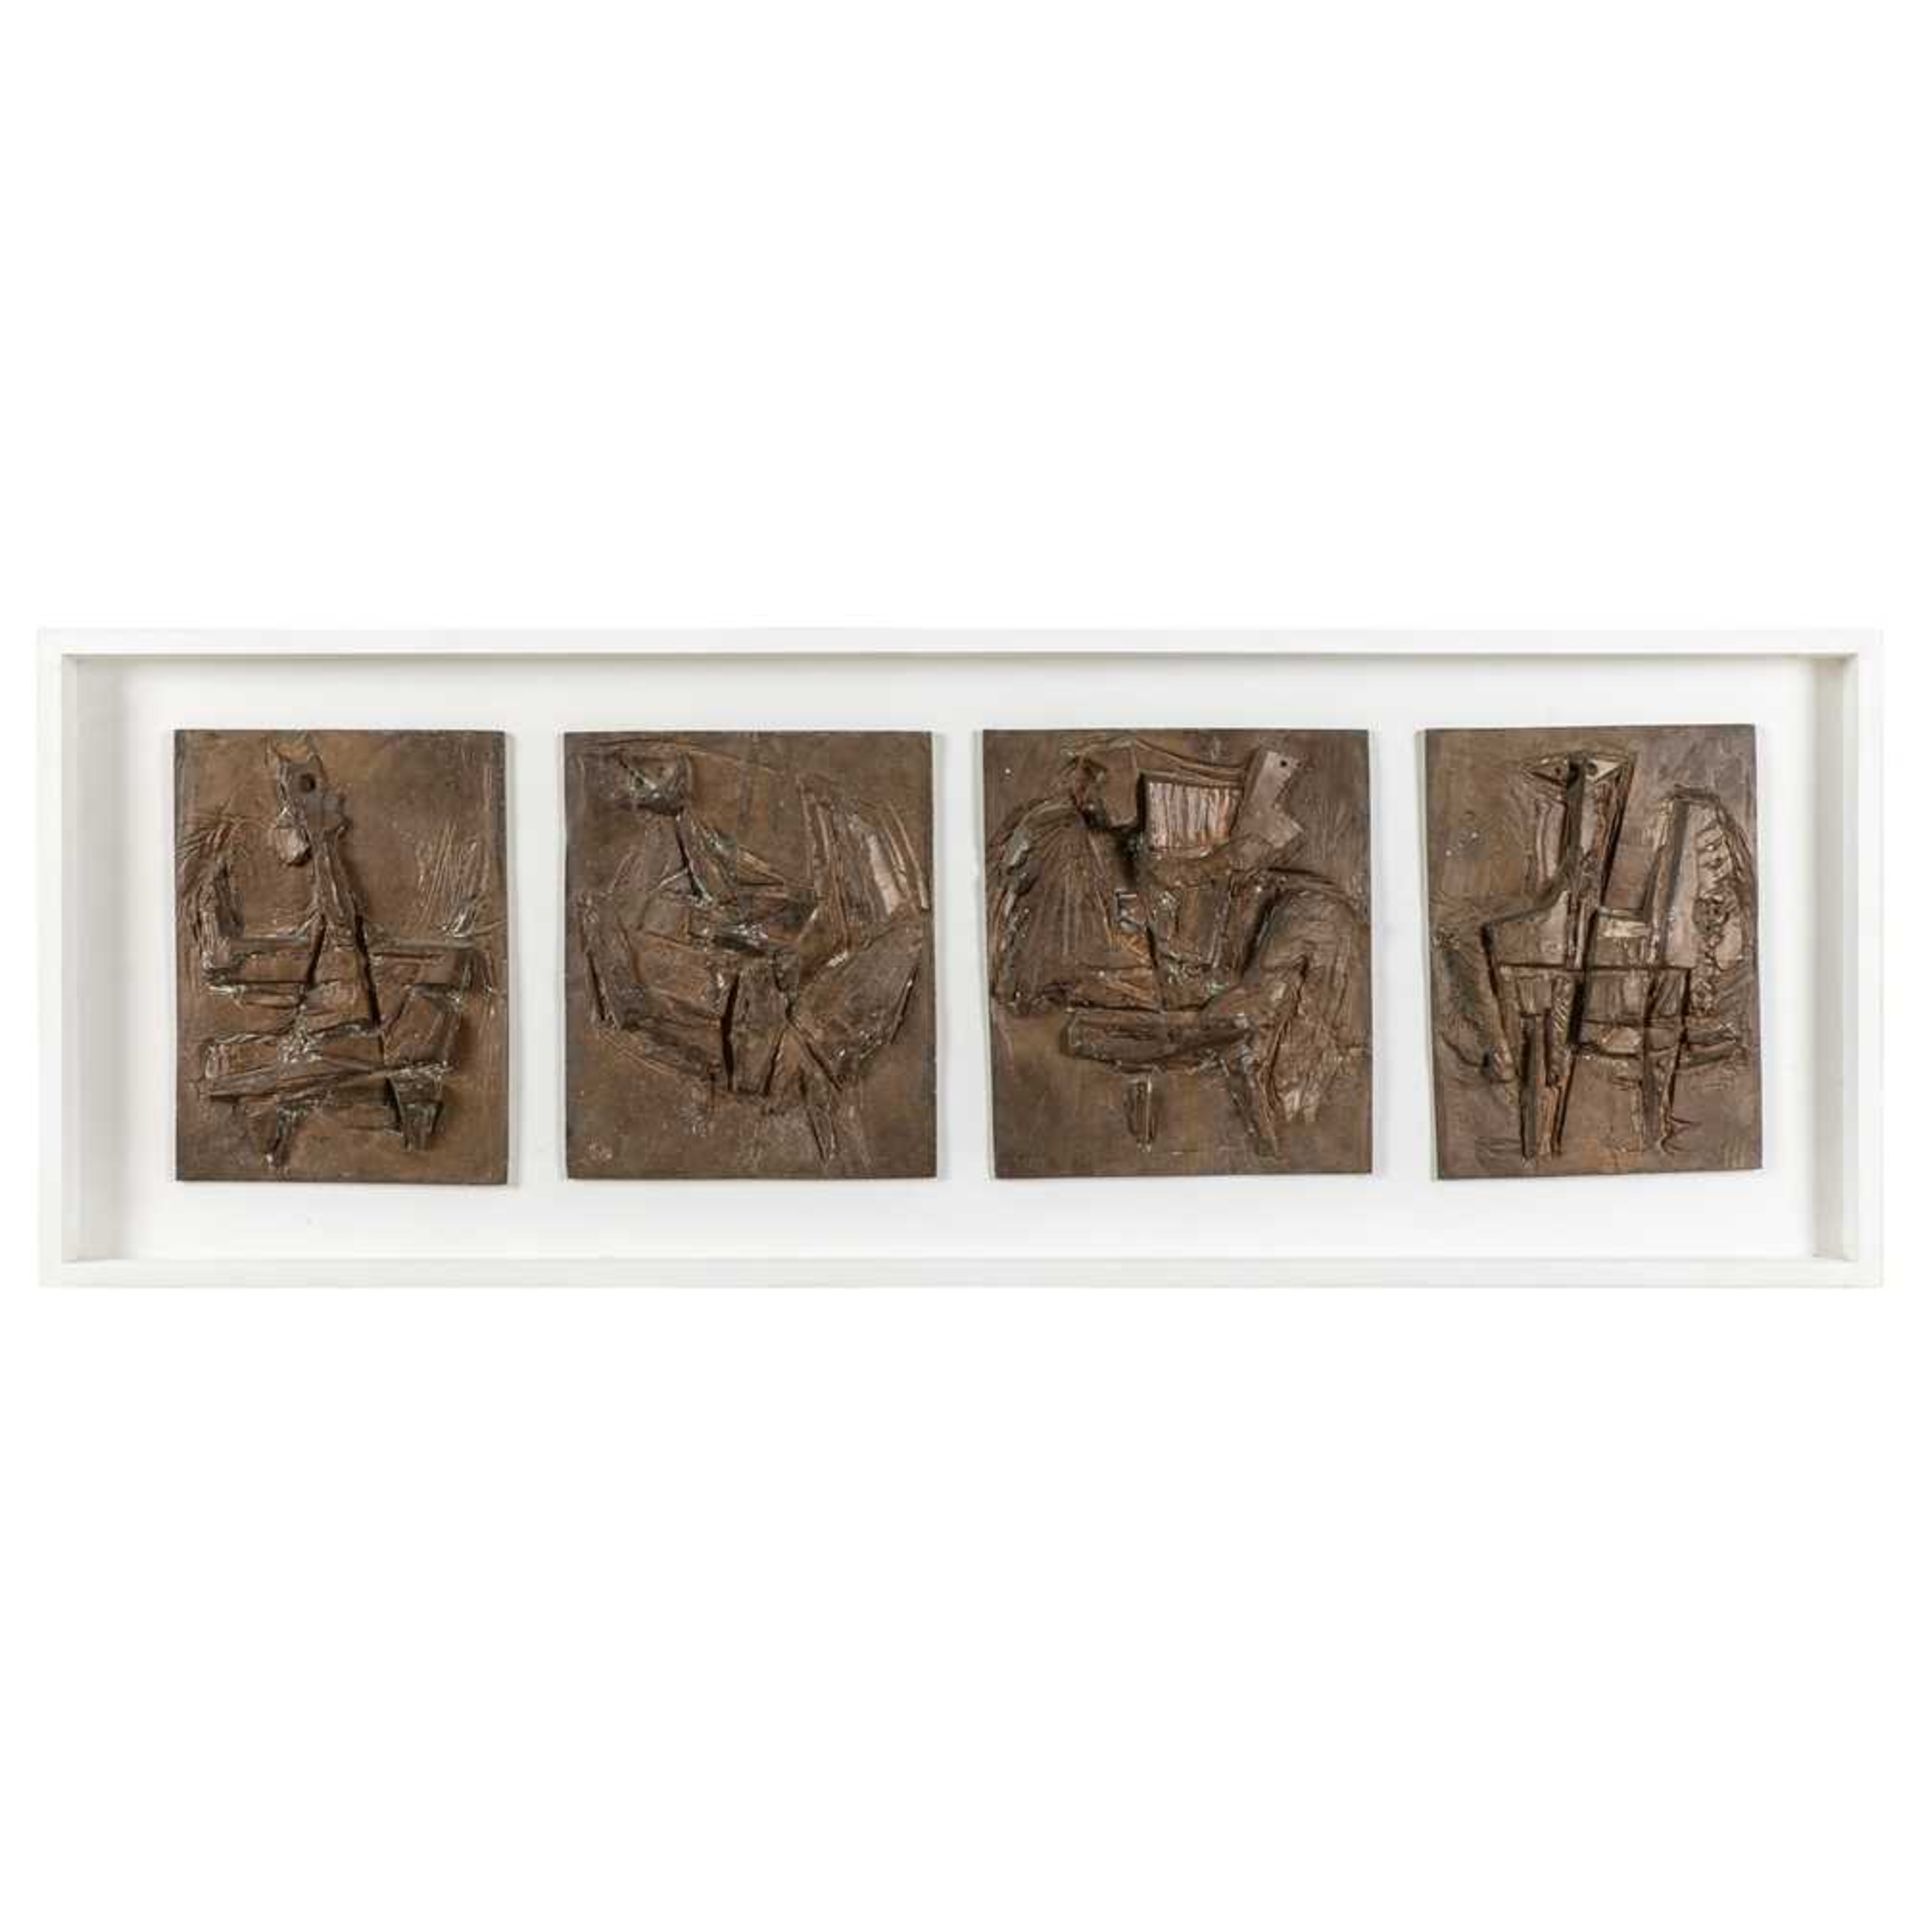 § Bernard Meadows (British 1915-2005) Four Reliefs on a Cock (Large), conceived 1958